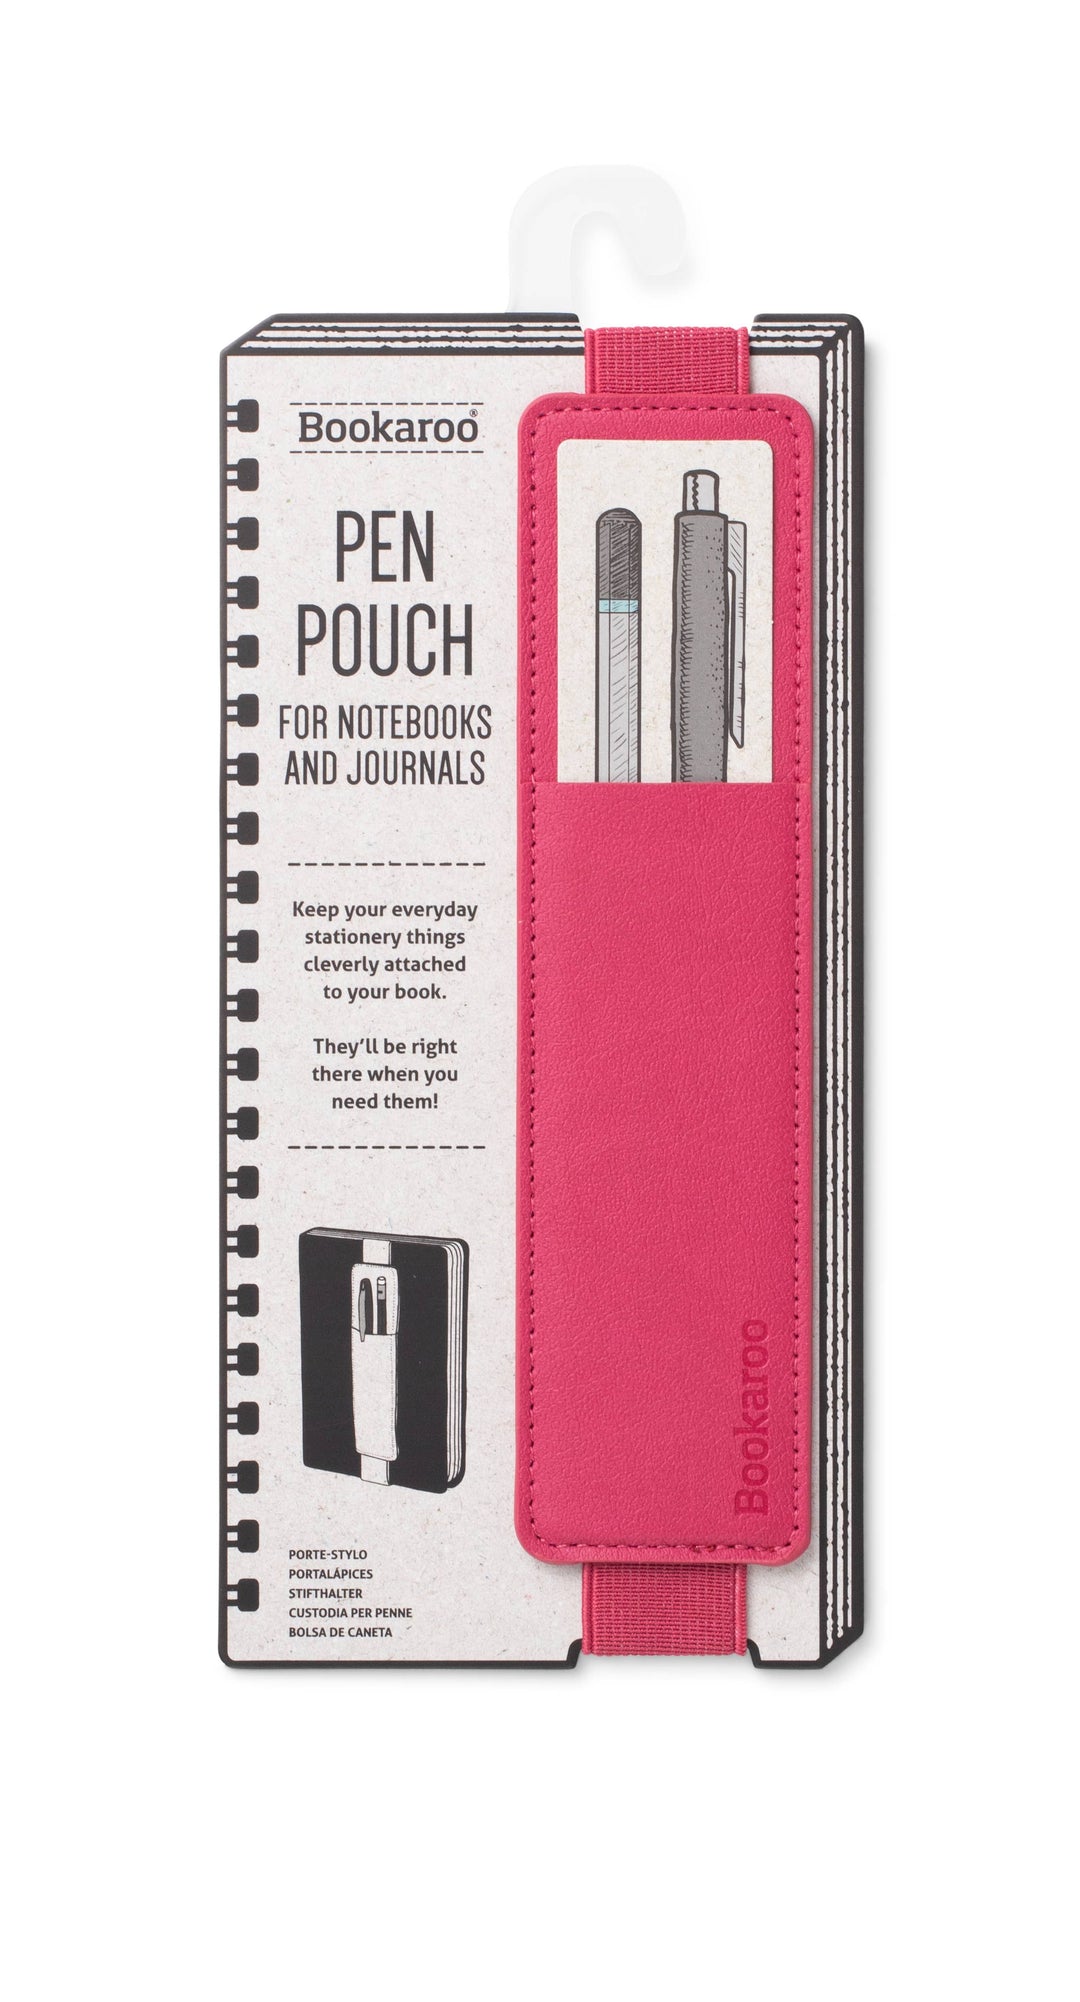 if USA - Bookaroo Pen Pouch: Turquoise